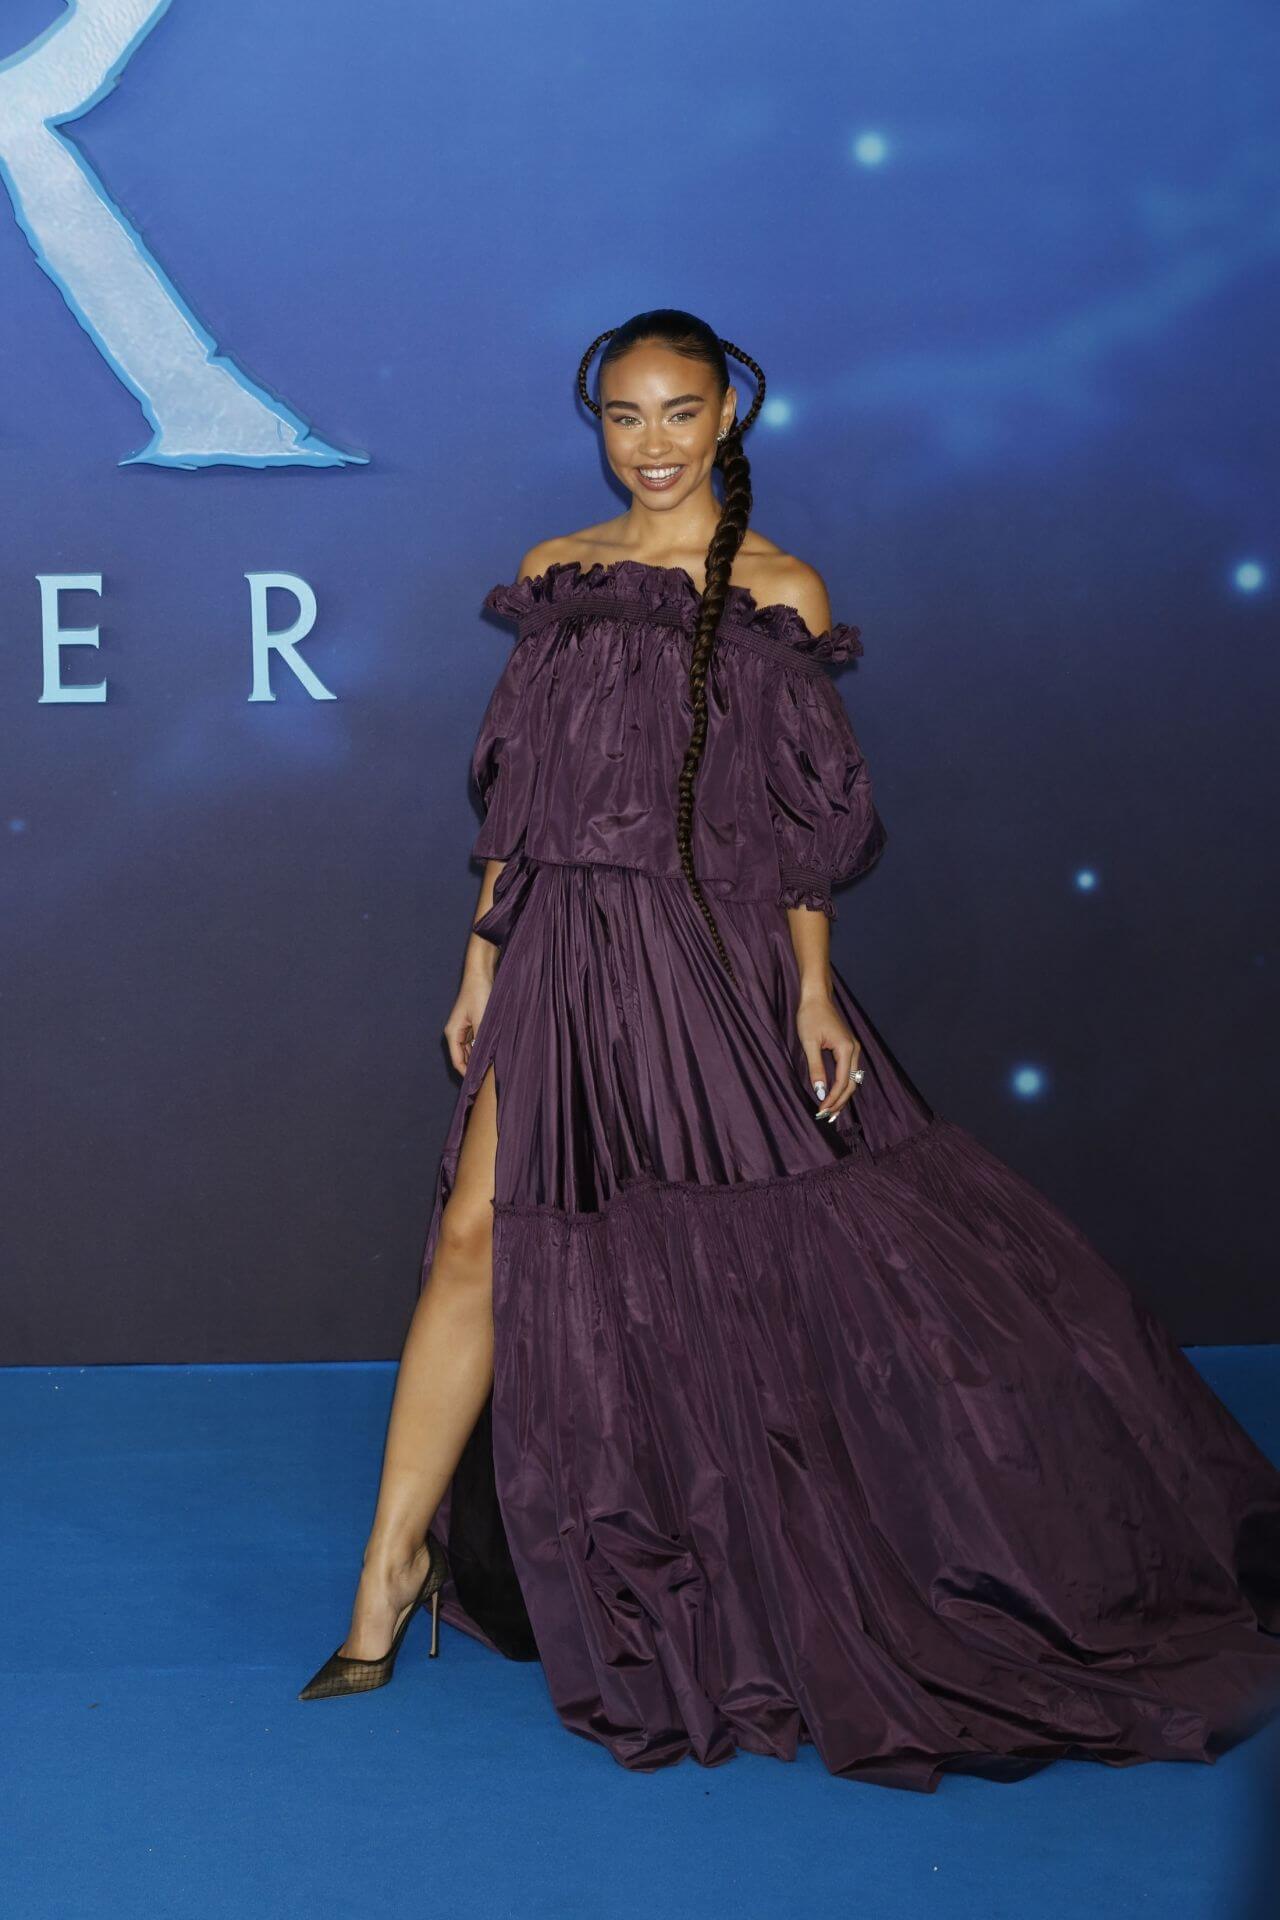 Bailey Bass In Purple Off Shoulder Long Slit Cut Flare Gown At “Avatar: The Way of Water” Premiere in London